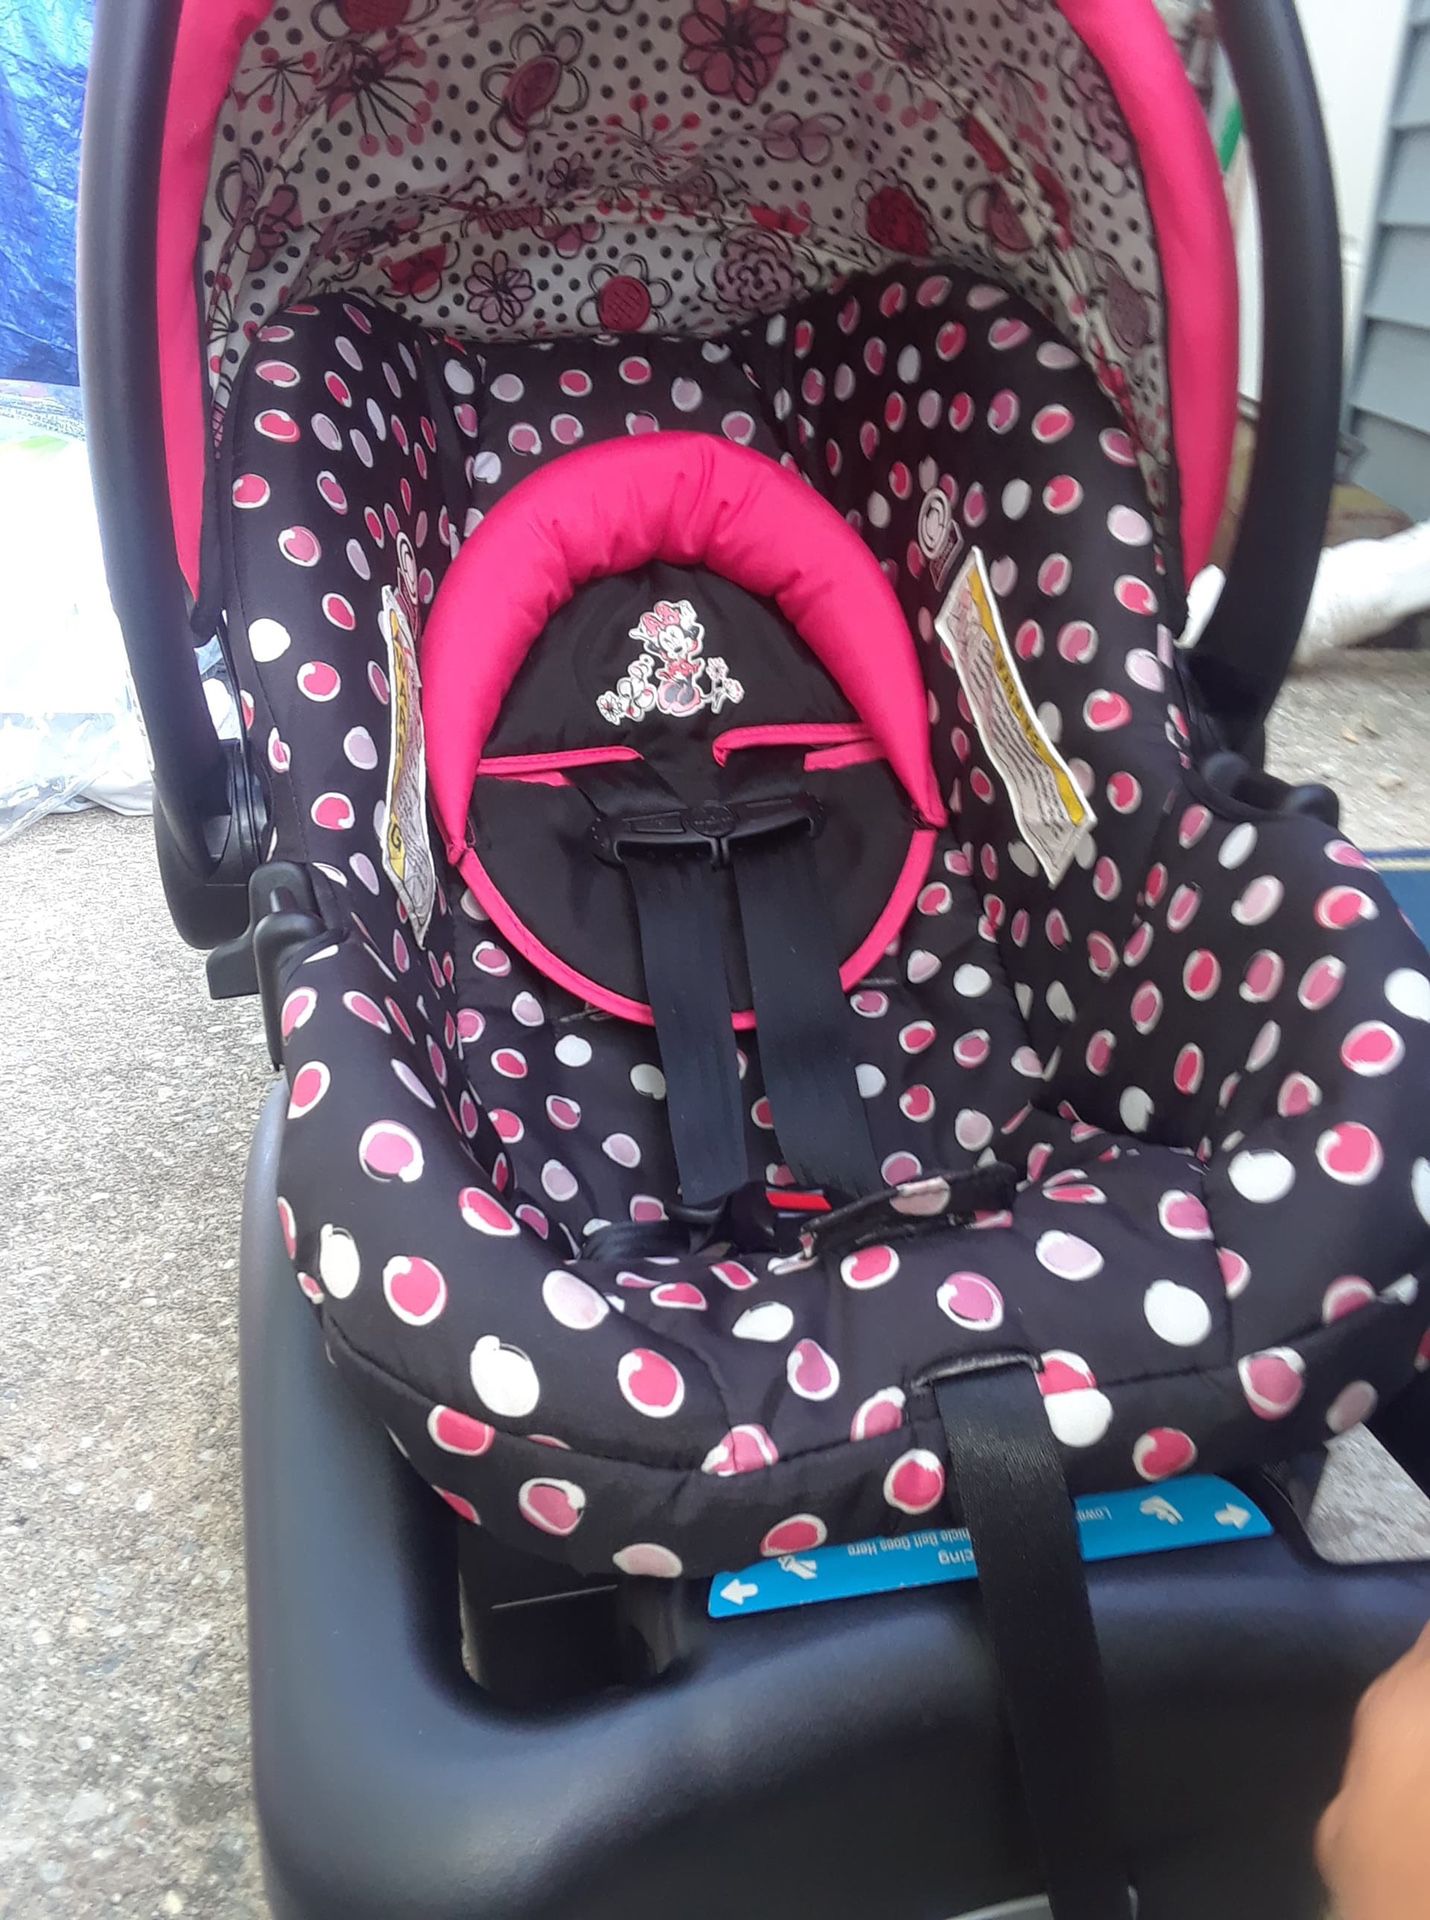 Minnie Mouse car seat